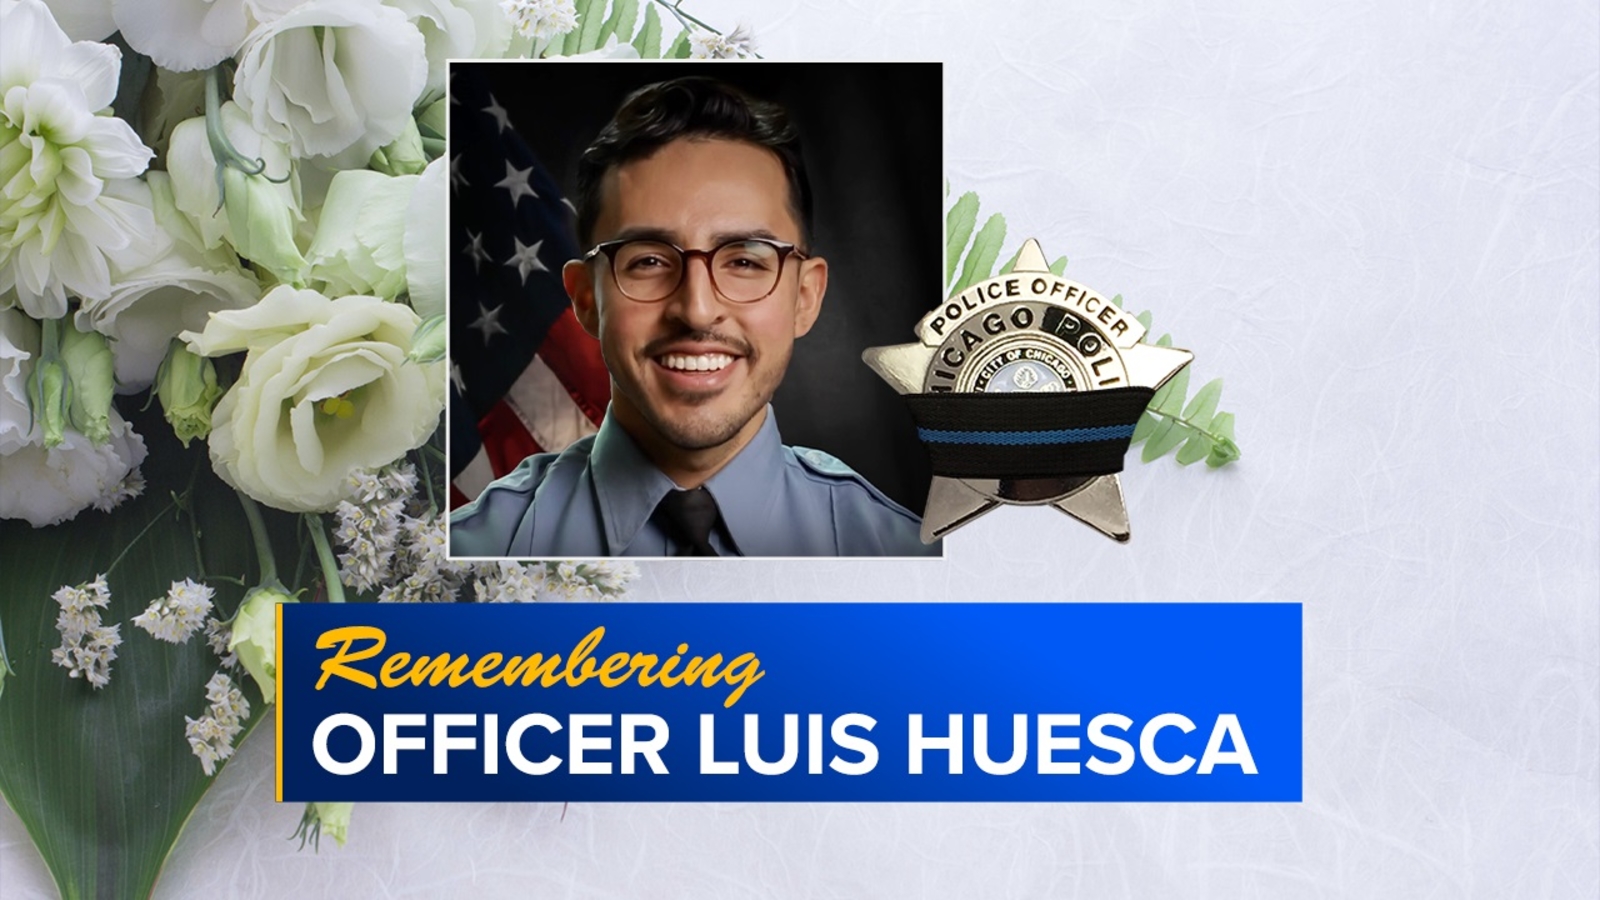 Luis Huesca, Chicago police officer killed, laid to rest at Rosehill Cemetery after St. Rita of Cascia Shrine Chapel funeral [Video]